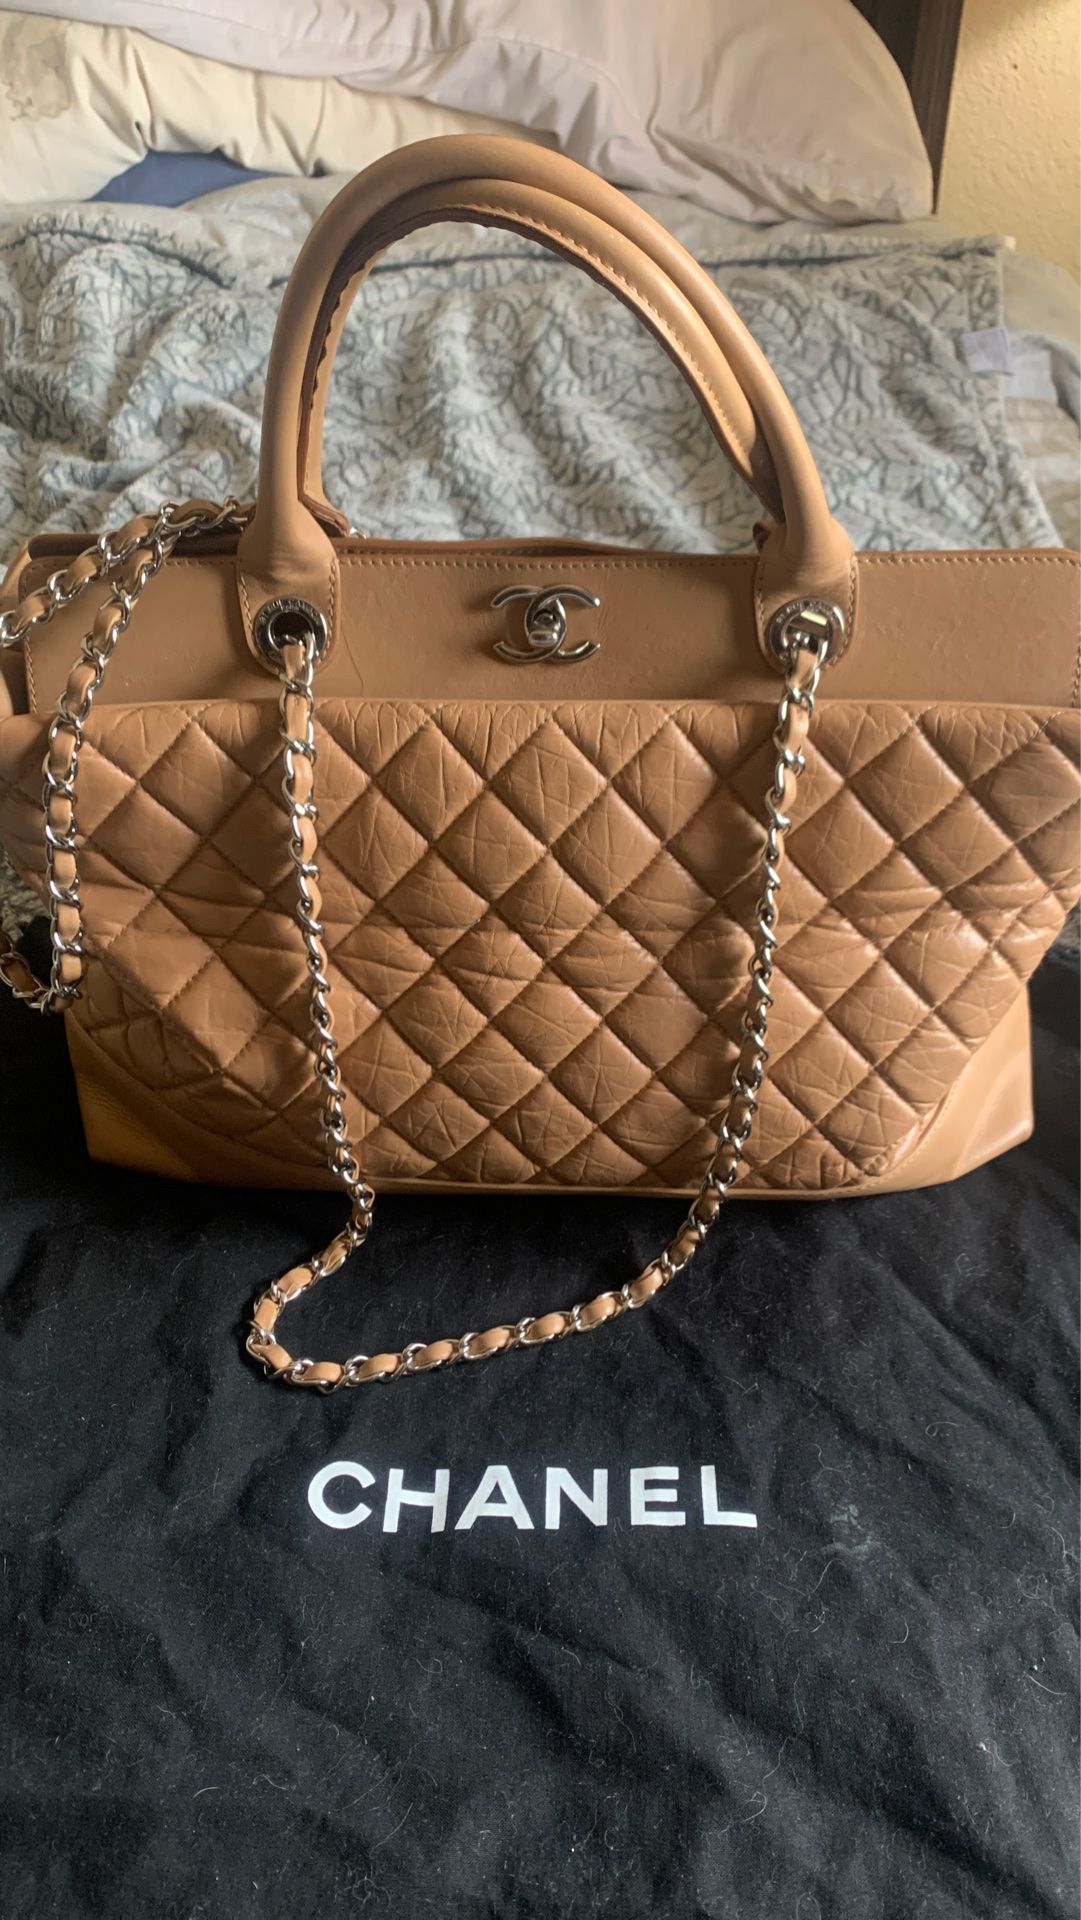 Authentic Chanel Handbag/ with dust bag !!